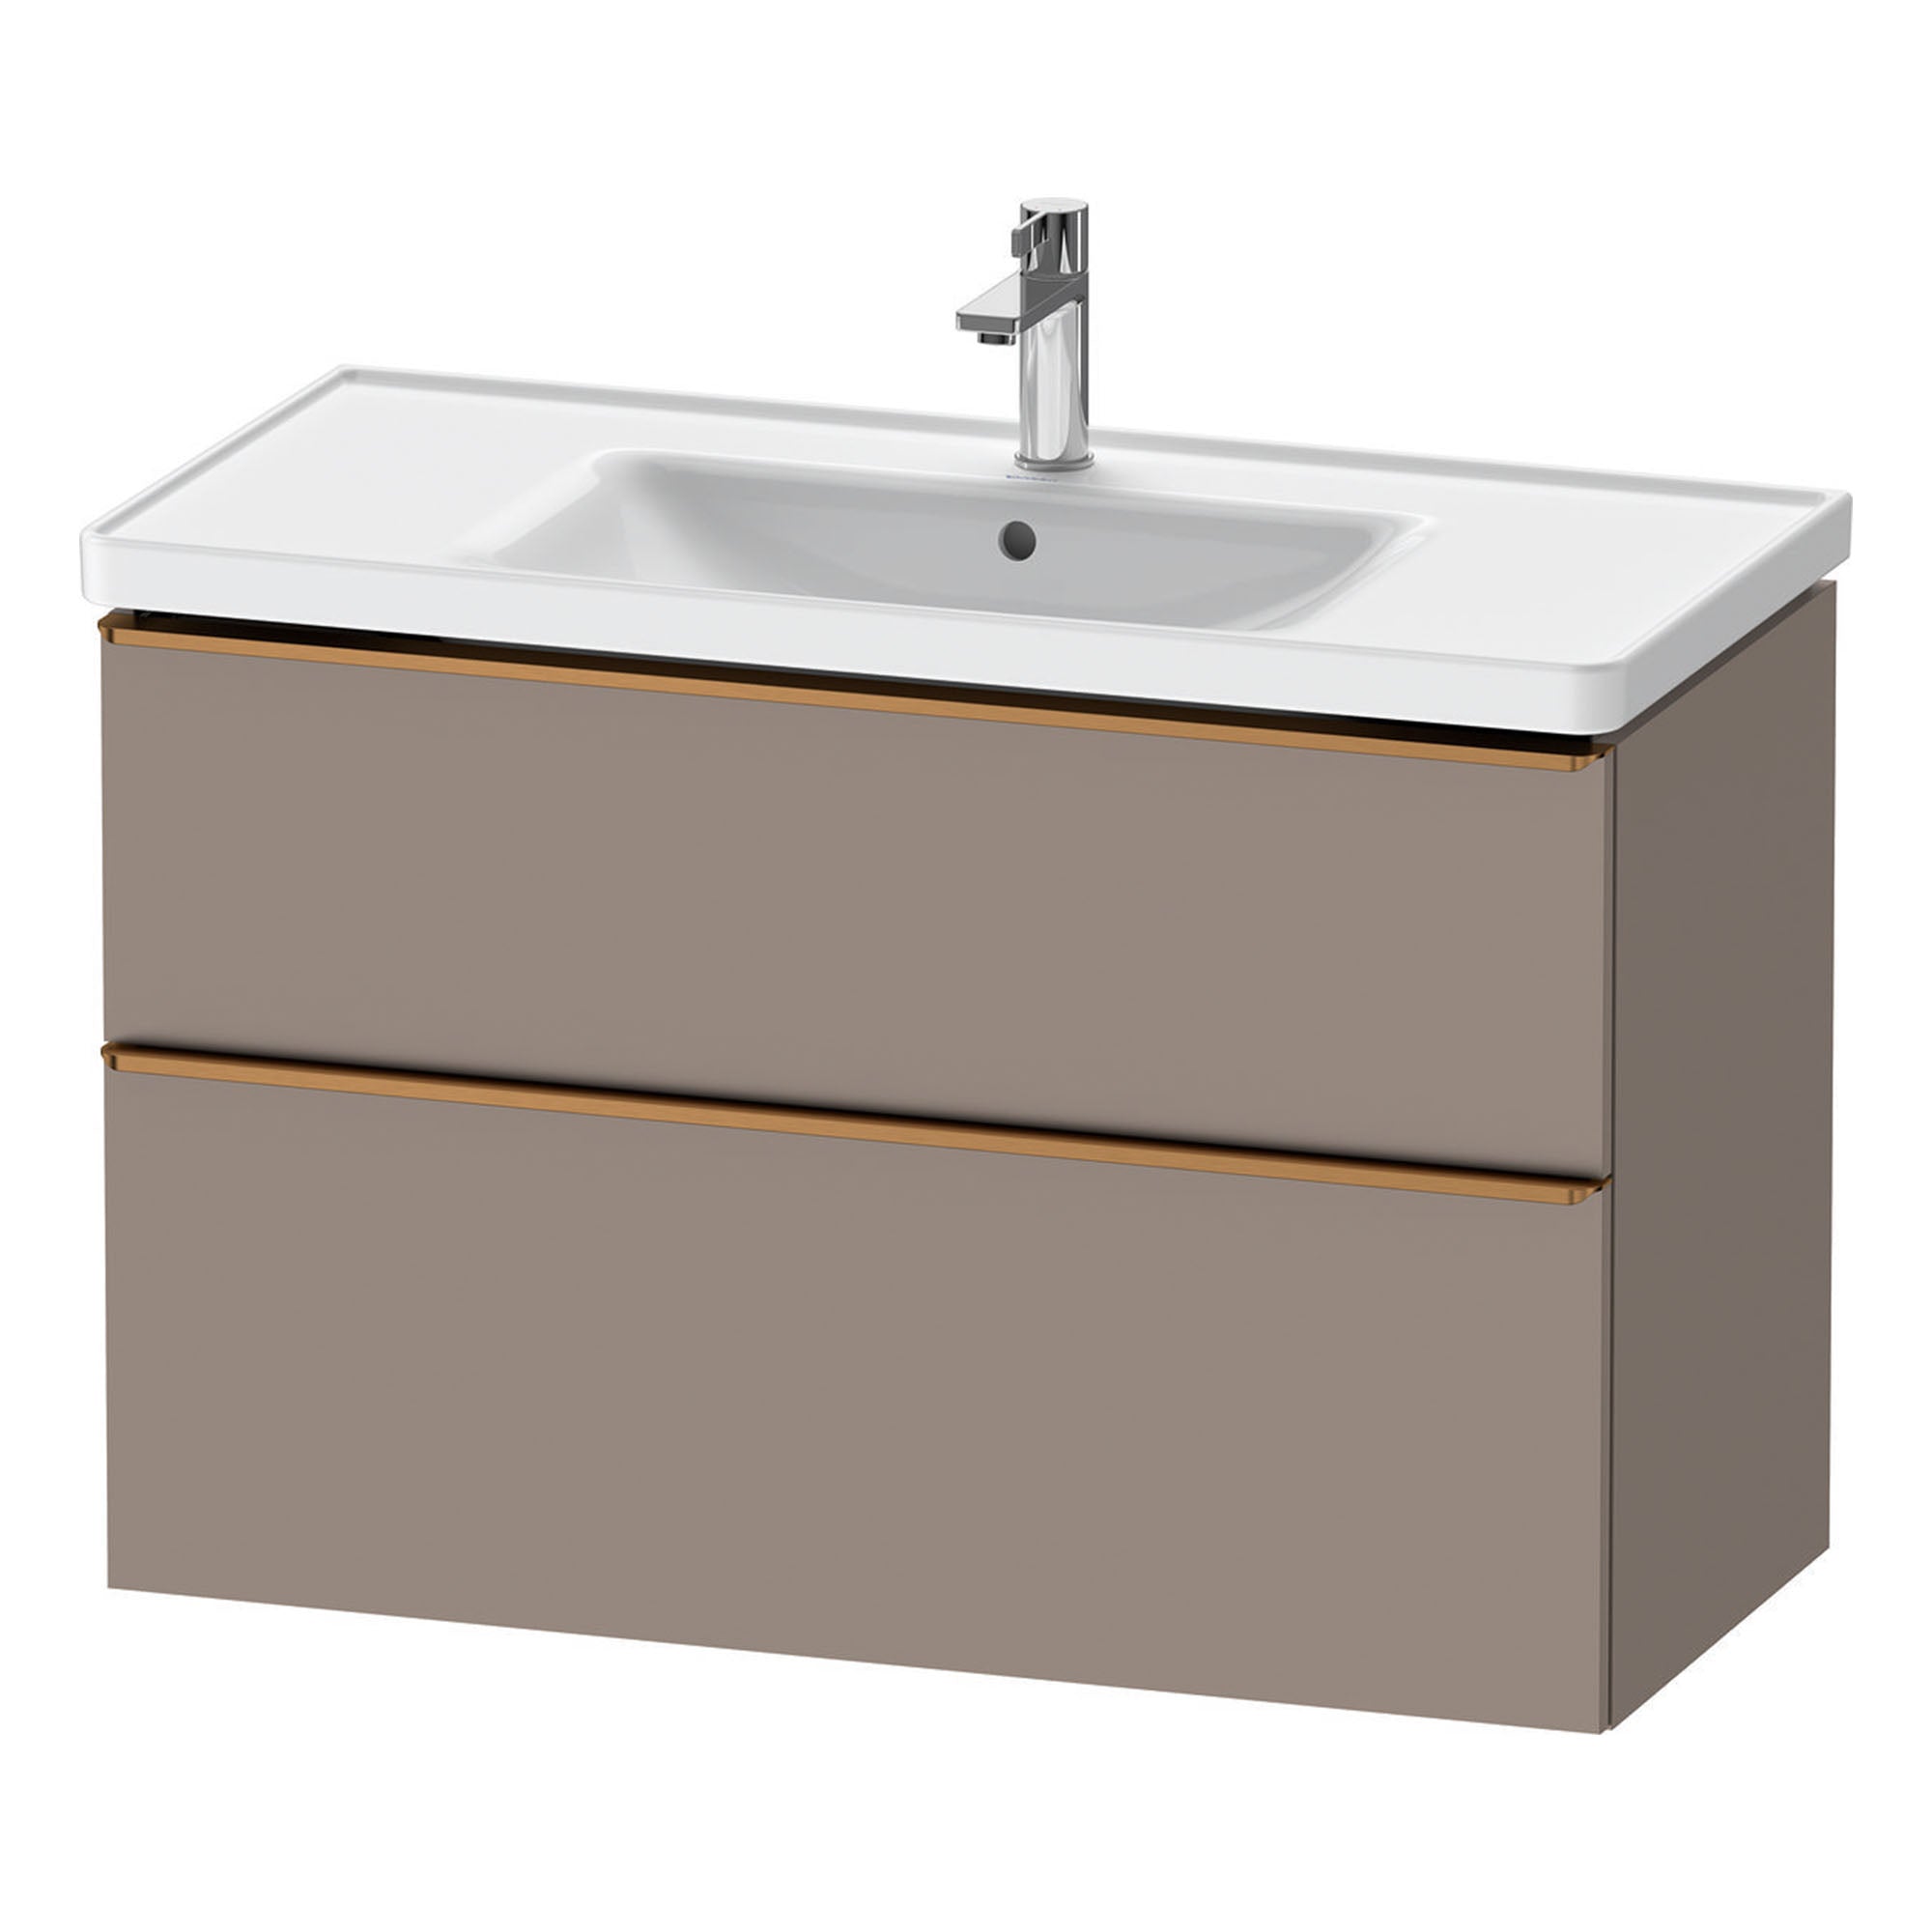 duravit d-neo 1000mm wall mounted vanity unit with d-neo basin basalt brushed bronze handles